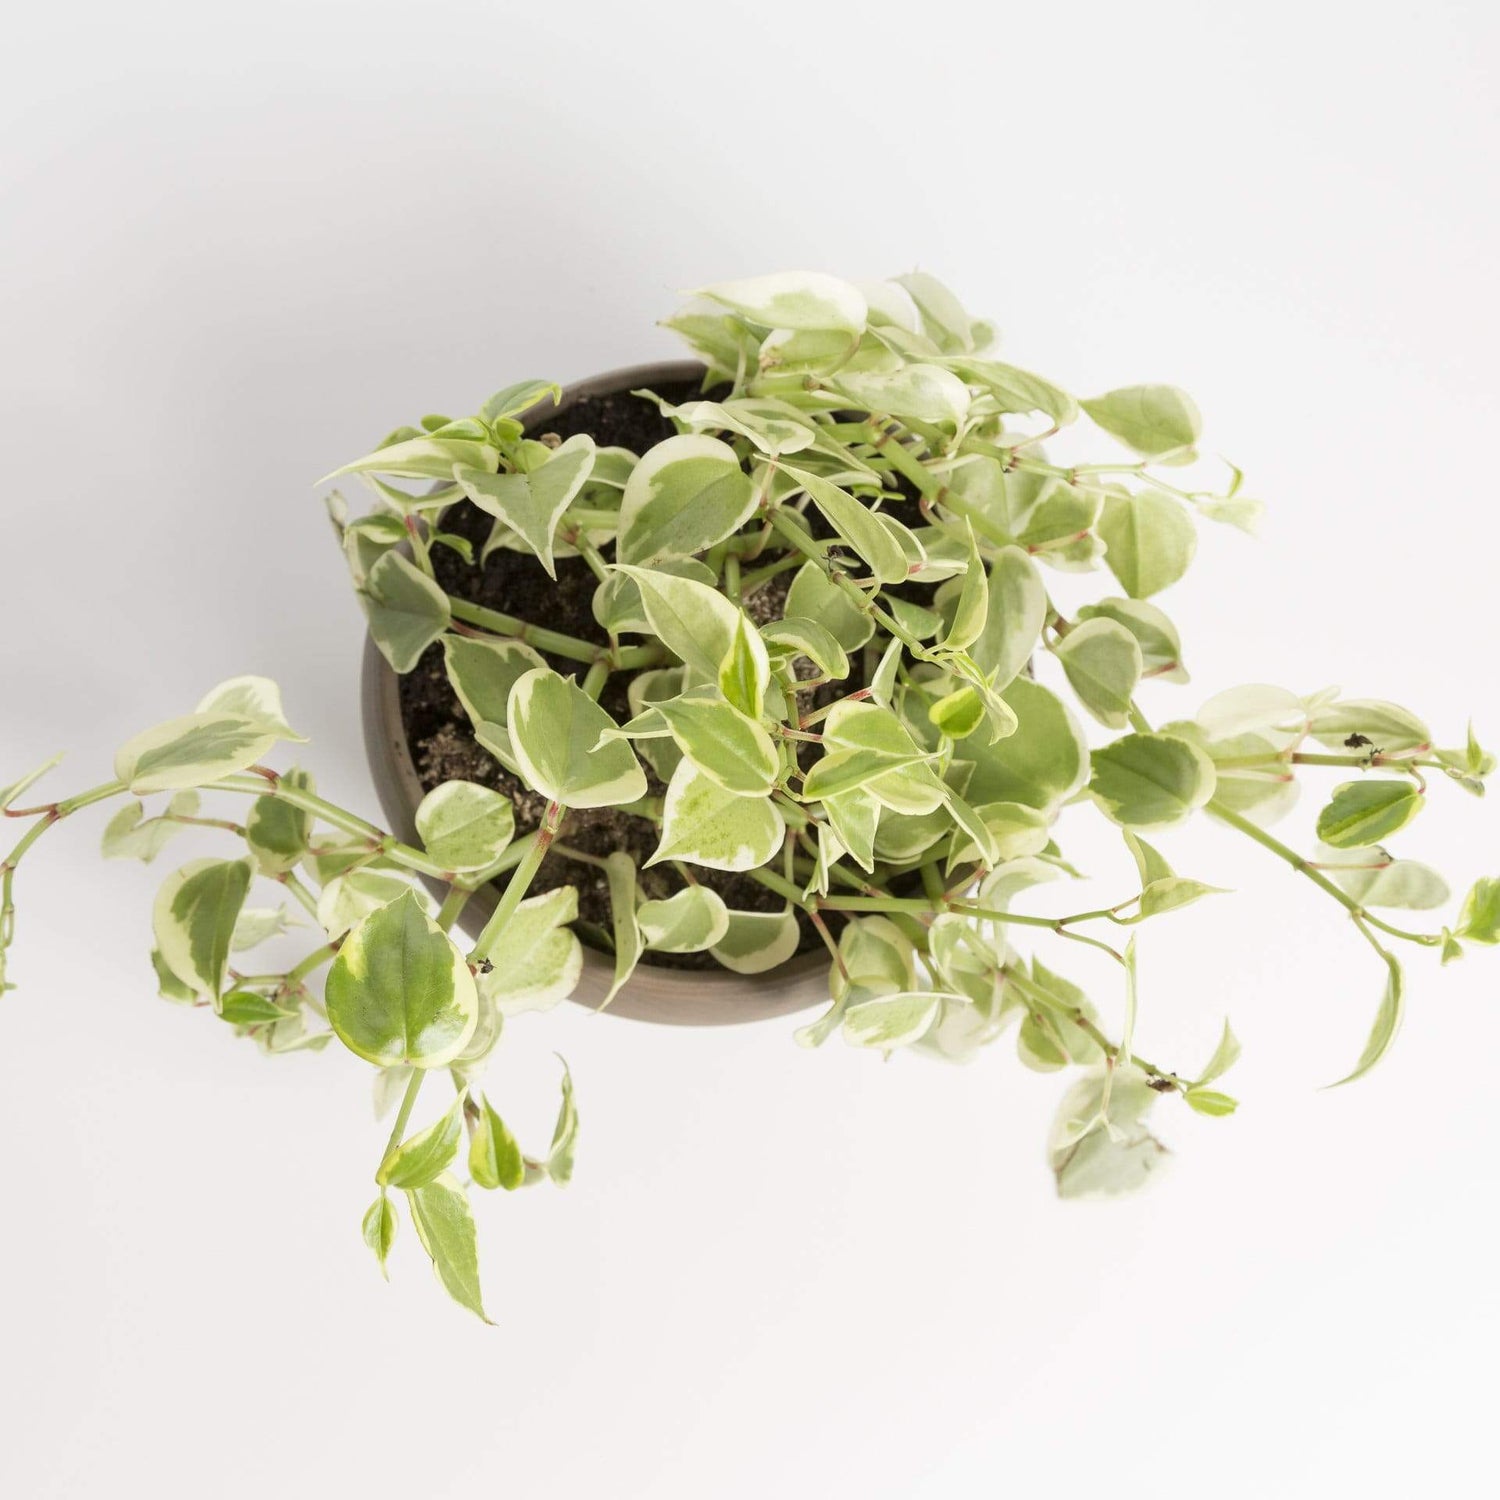 Urban Sprouts Plant Peperomia 'Scandens - Variegated'